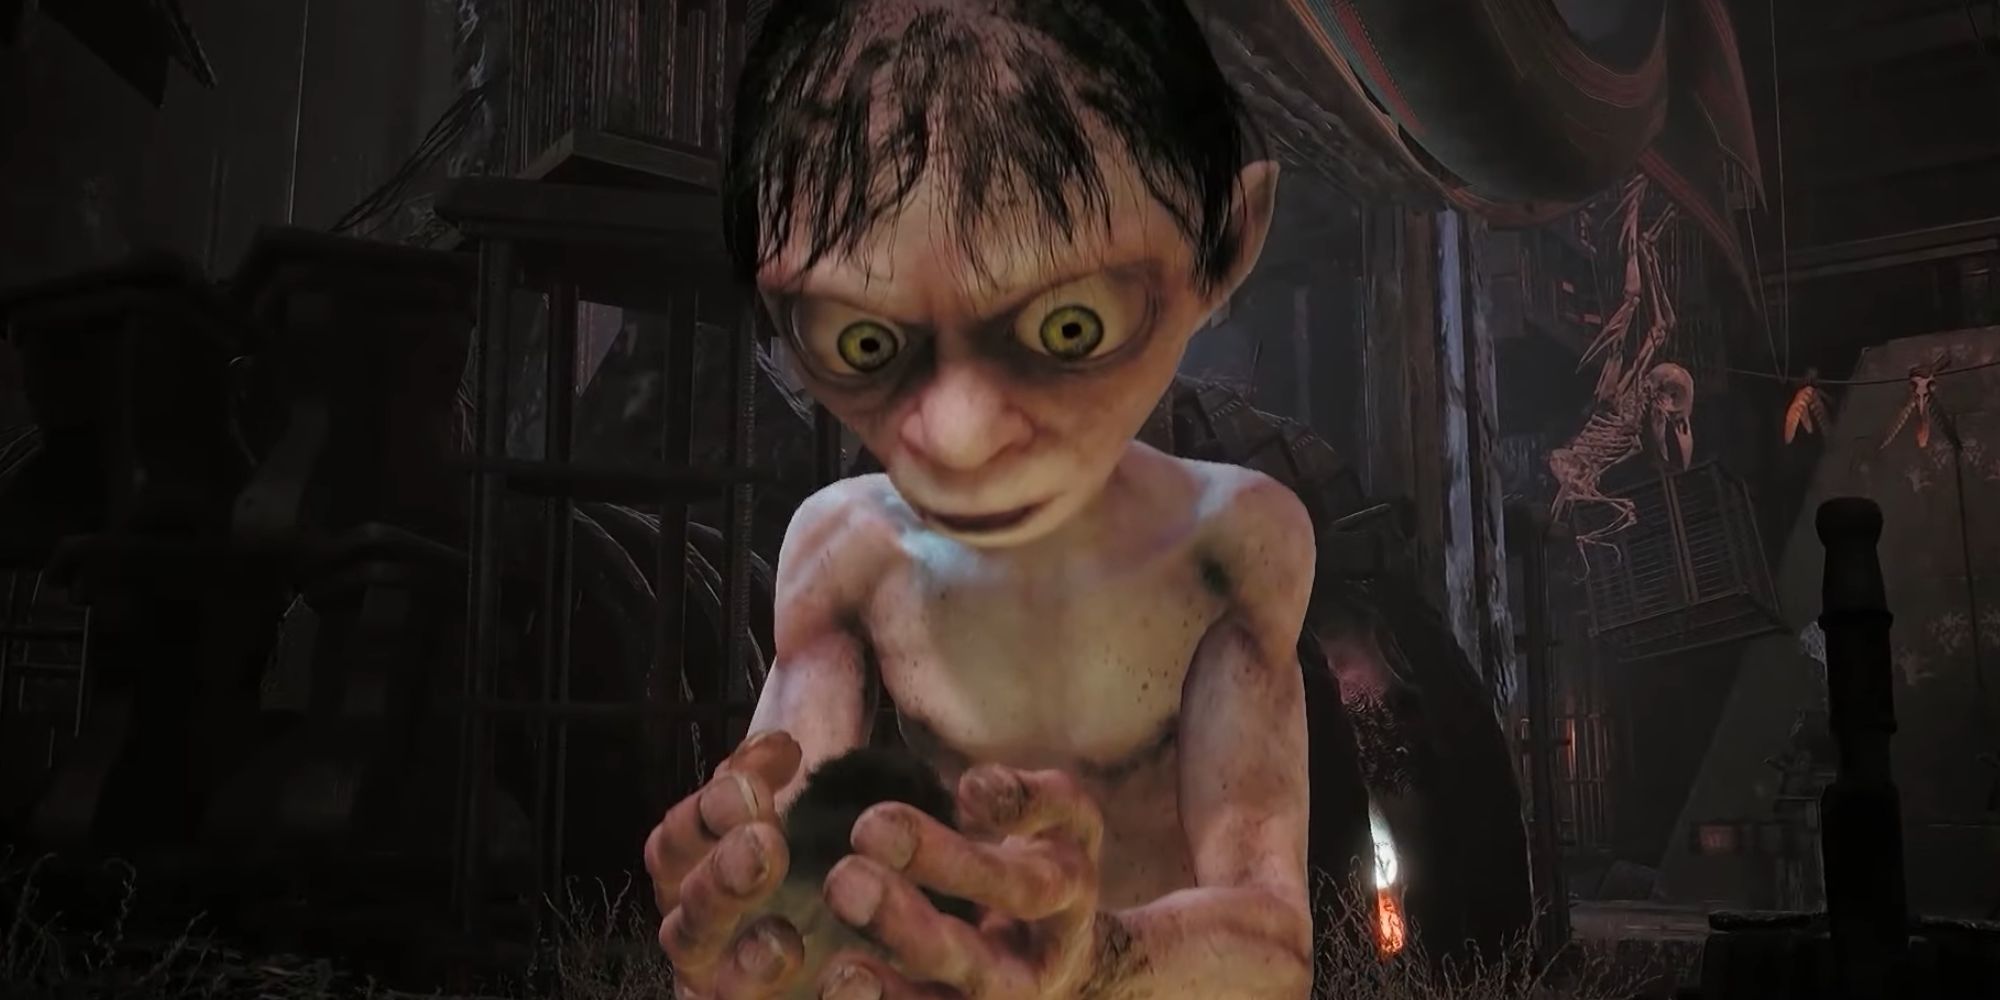 Lord of the Rings: Gollum is so bad, the developers are apologizing